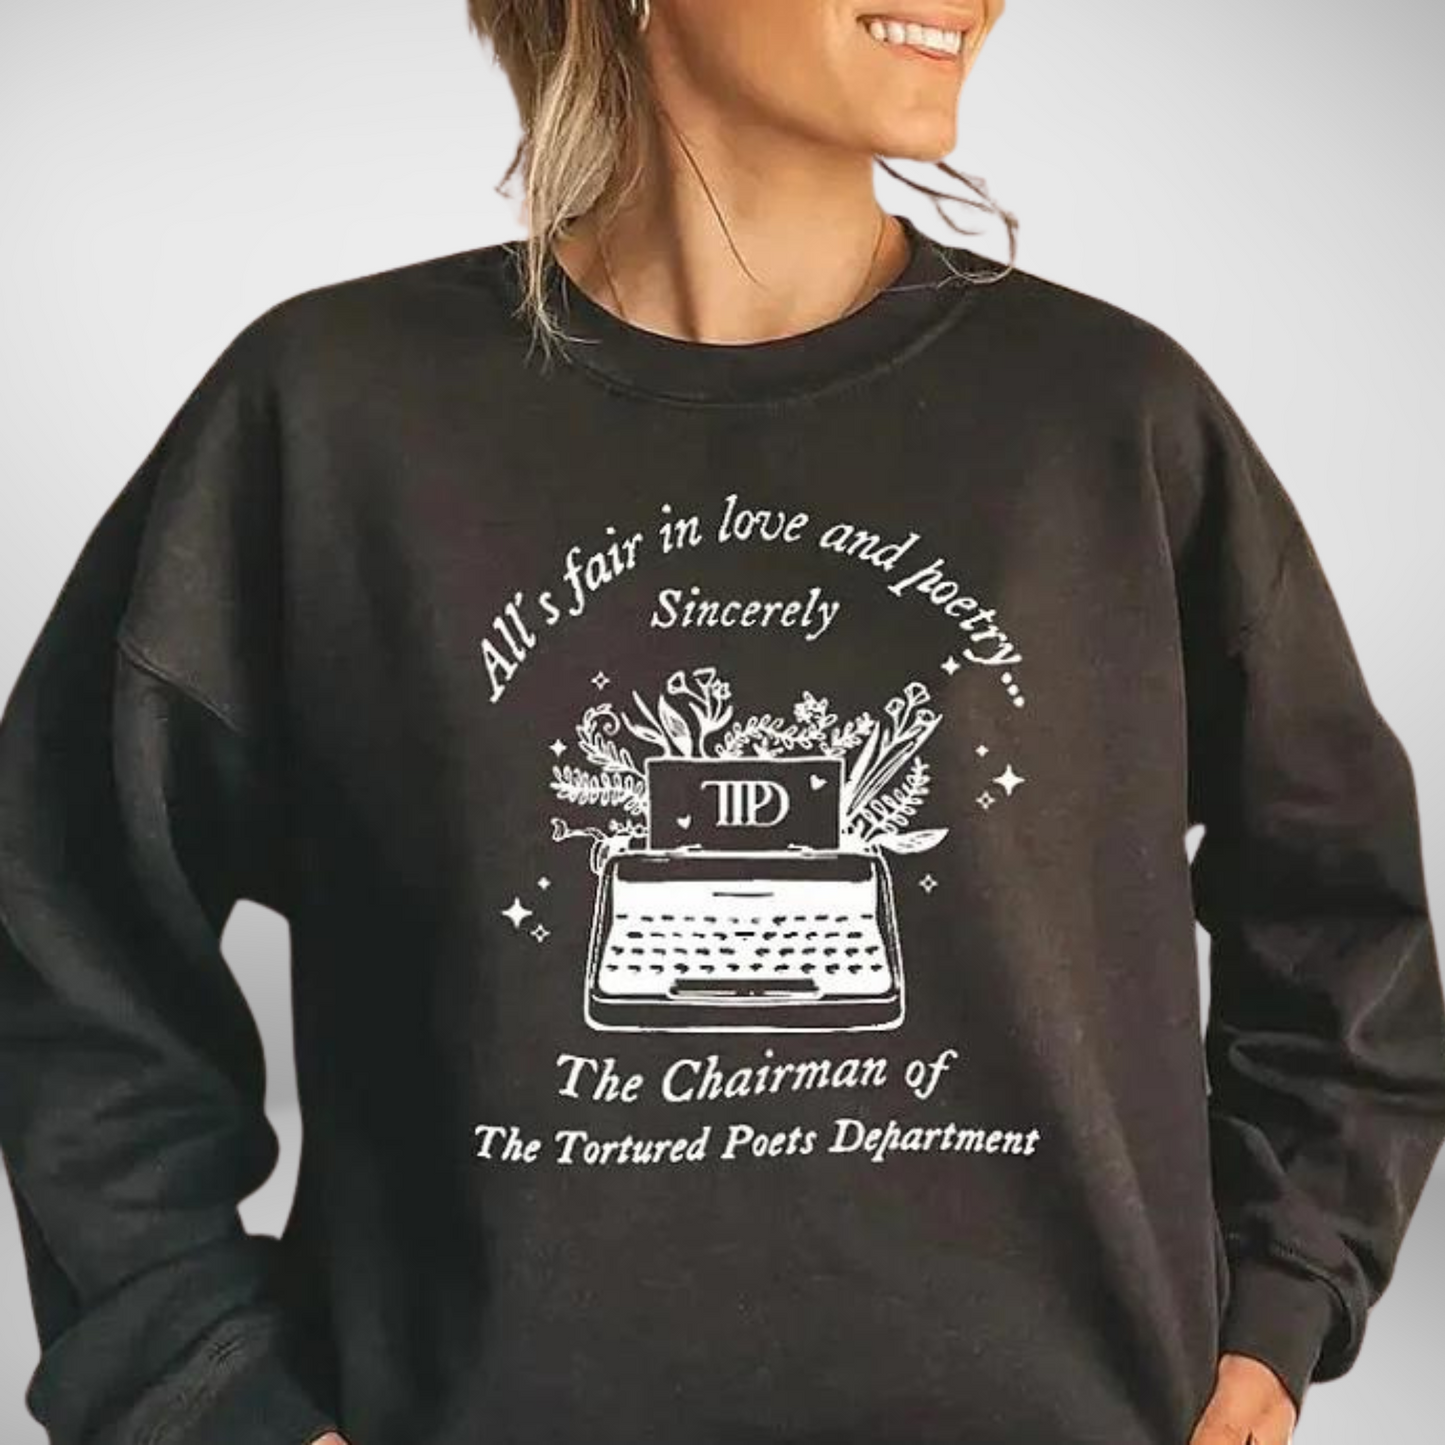 All's Fair In Love And poetry Sweatshirt - Black TTPD Sweater